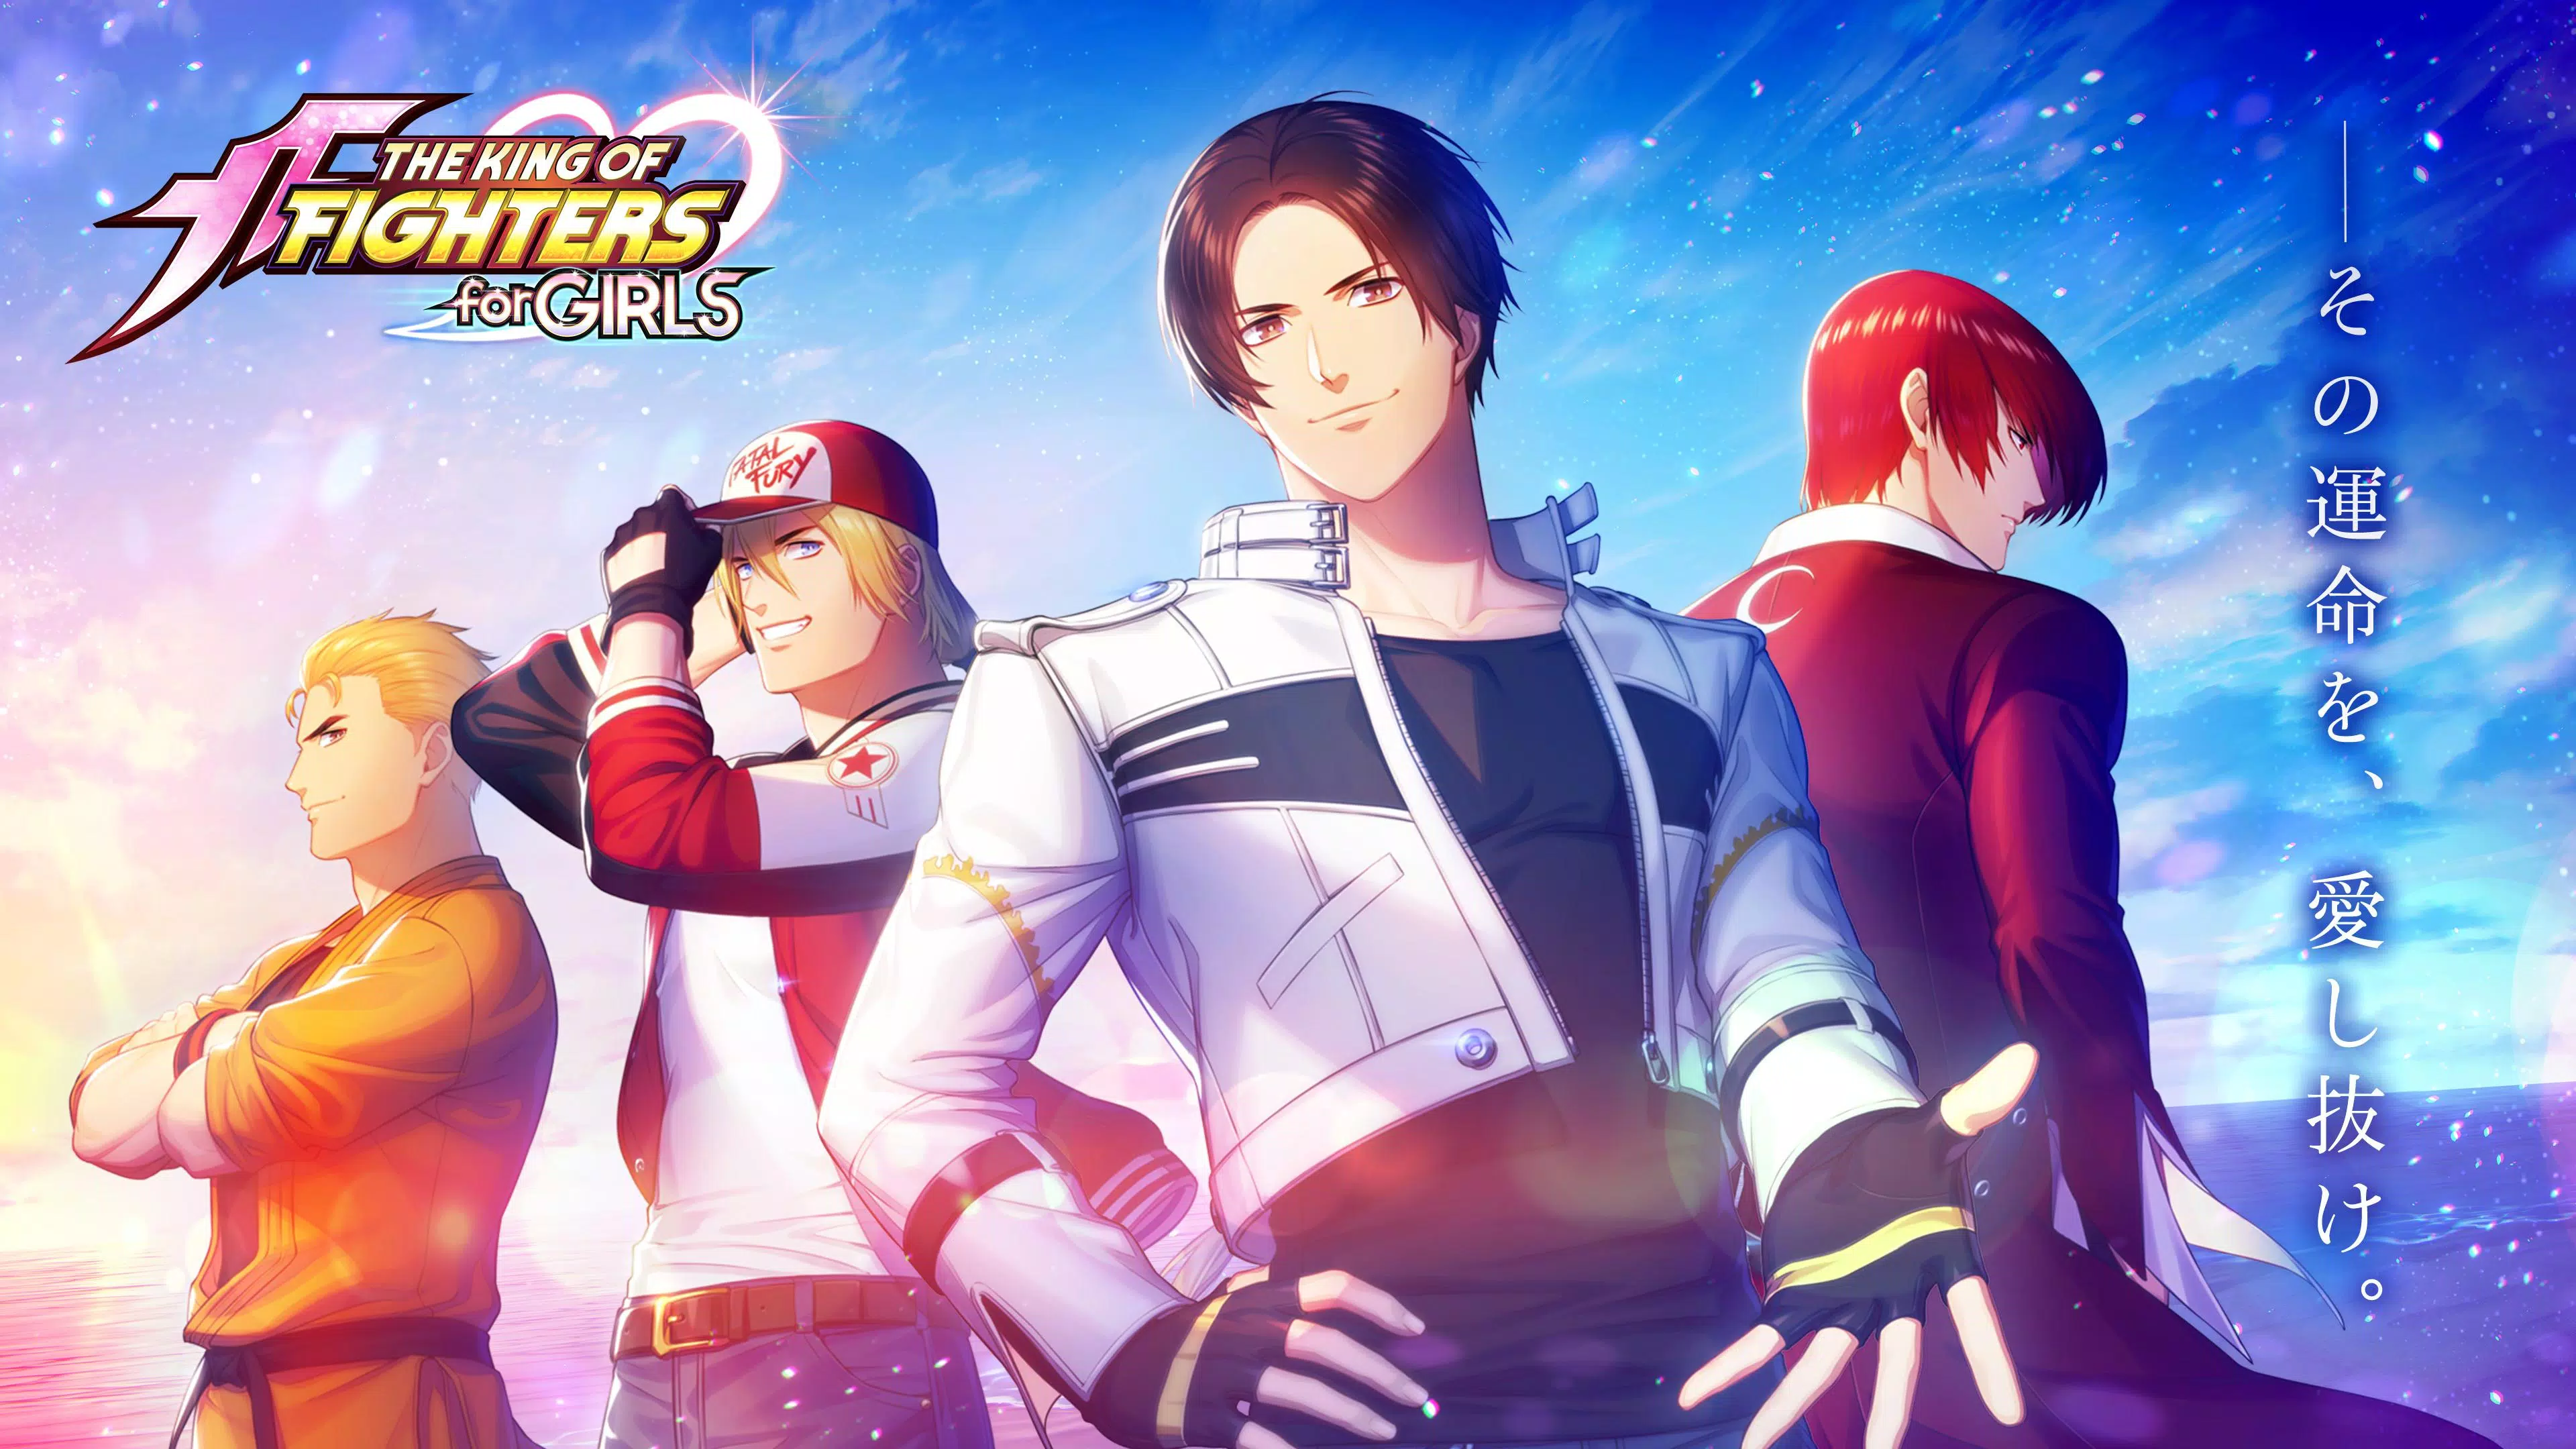 THE KING OF FIGHTERS for GIRLS APK للاندرويد تنزيل